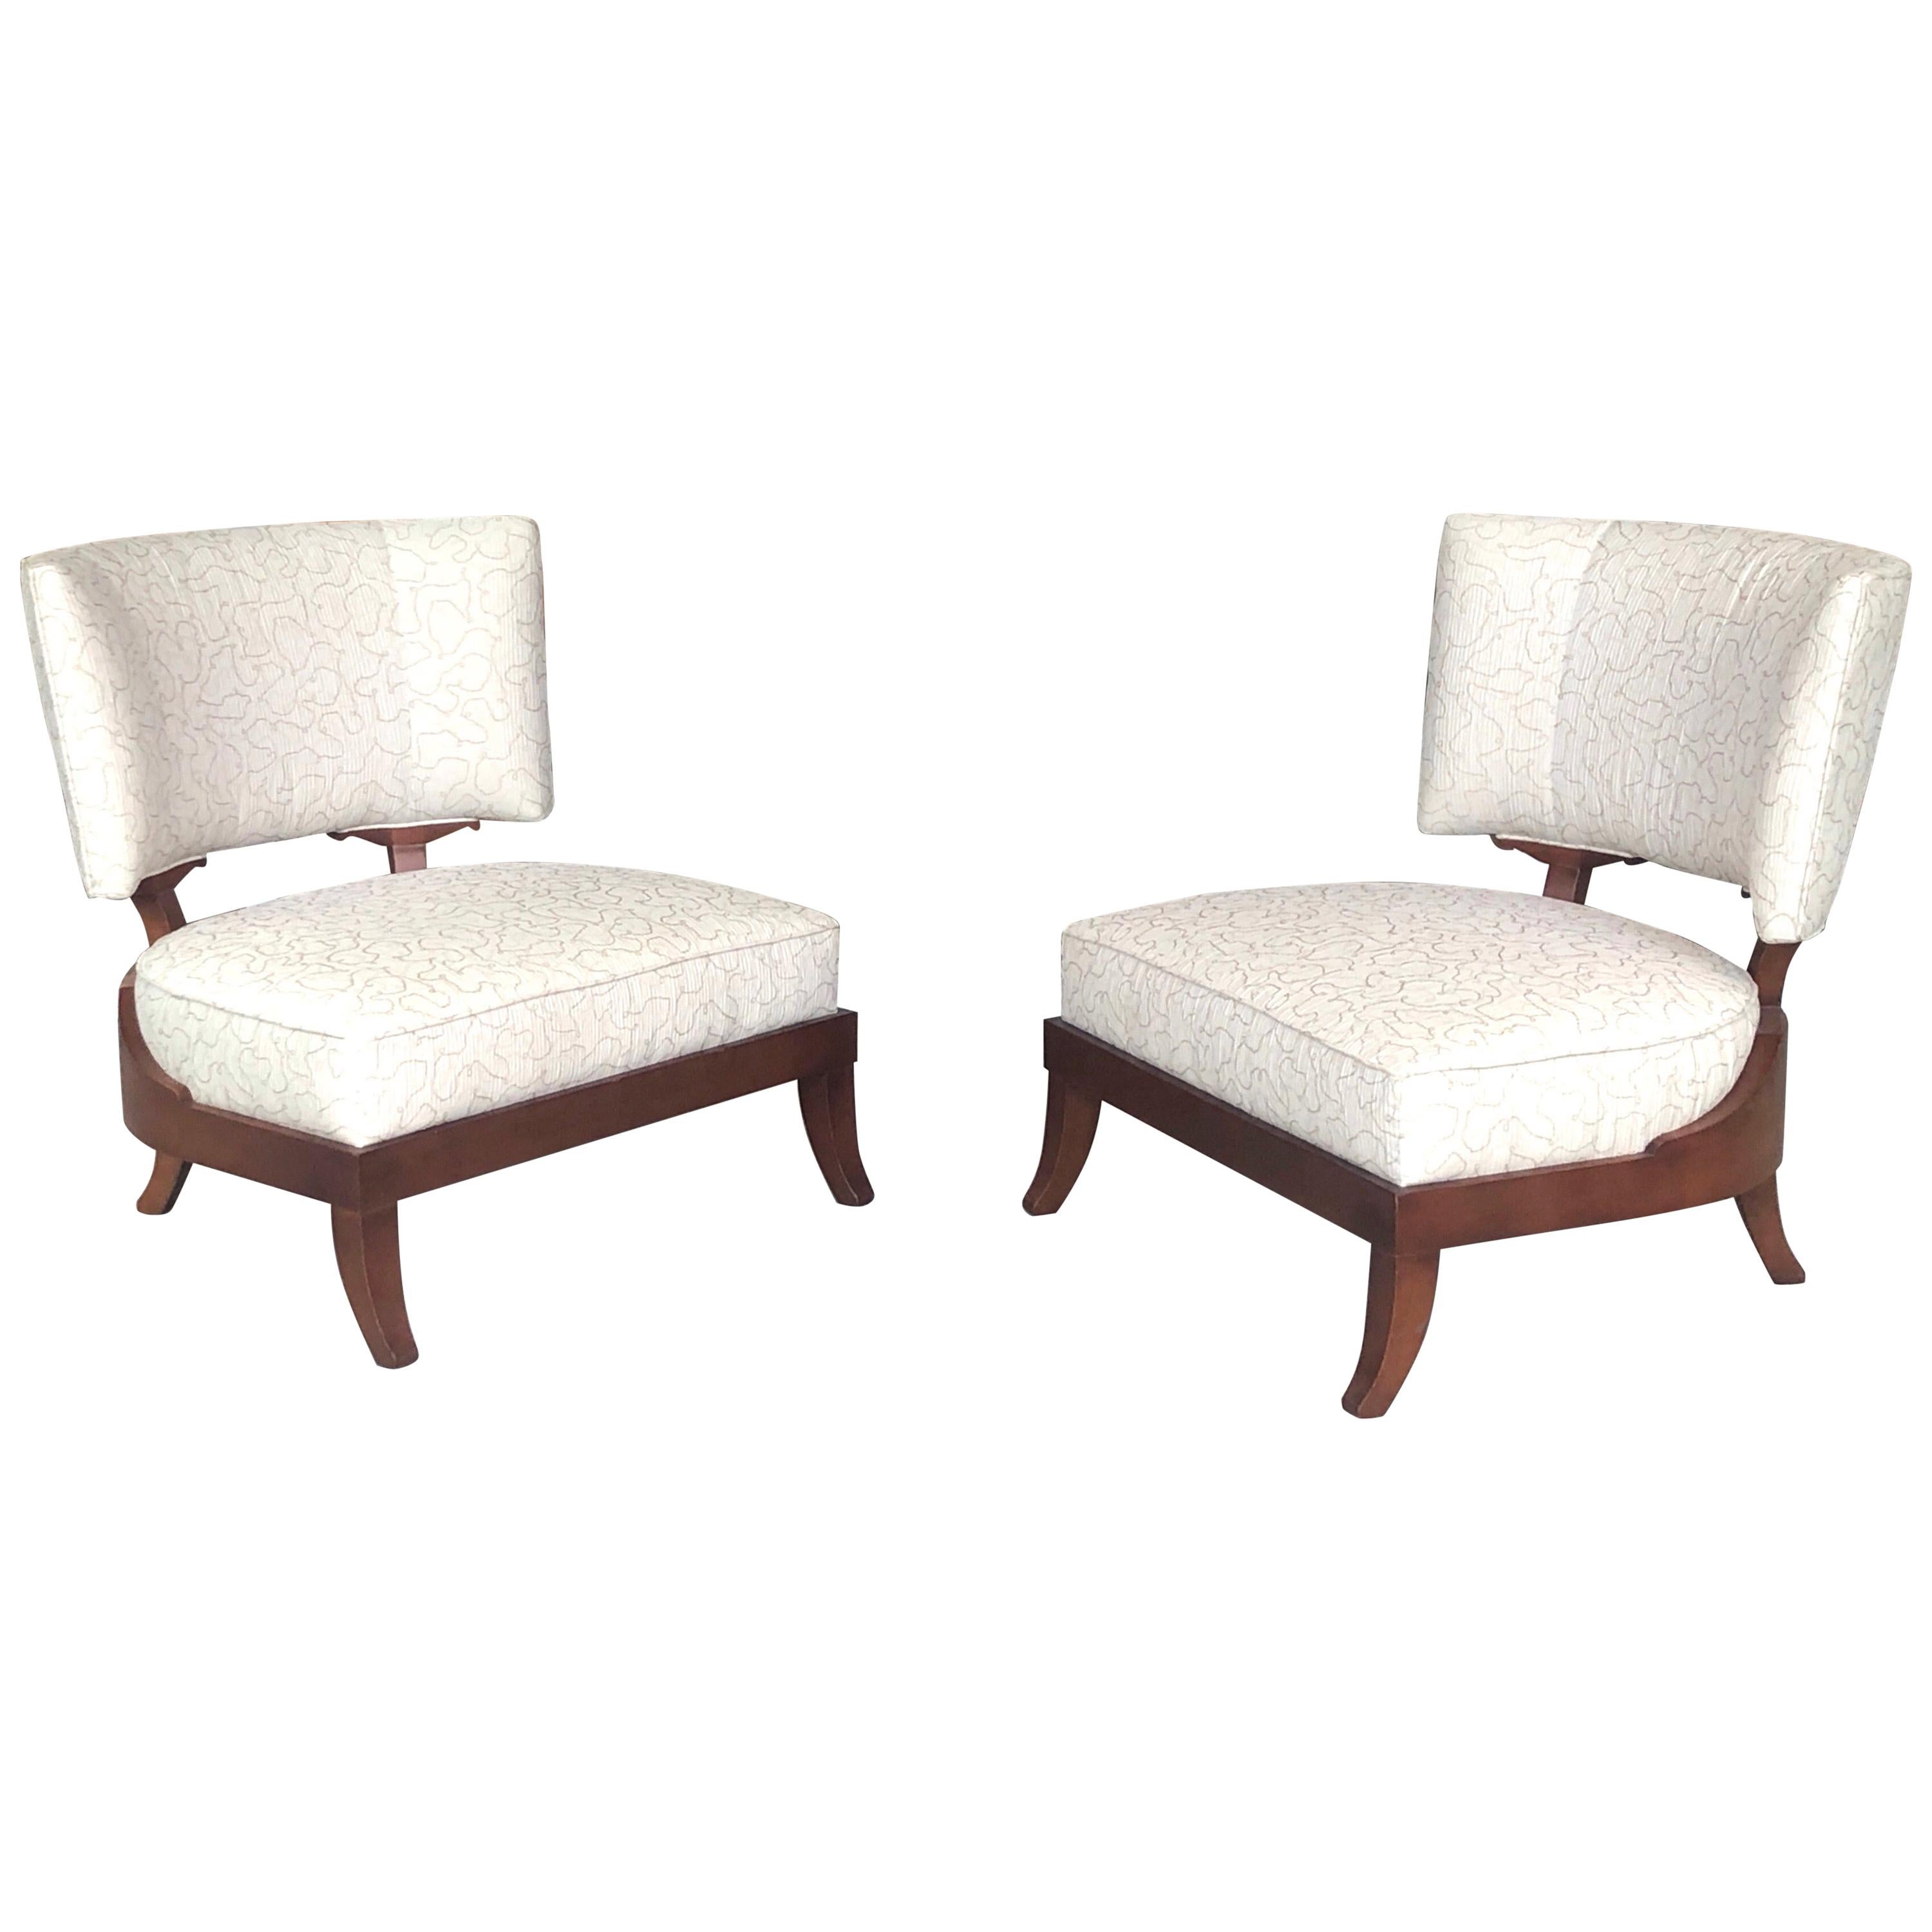 Pair of Slipper Lounge Klismos Chairs by Baker